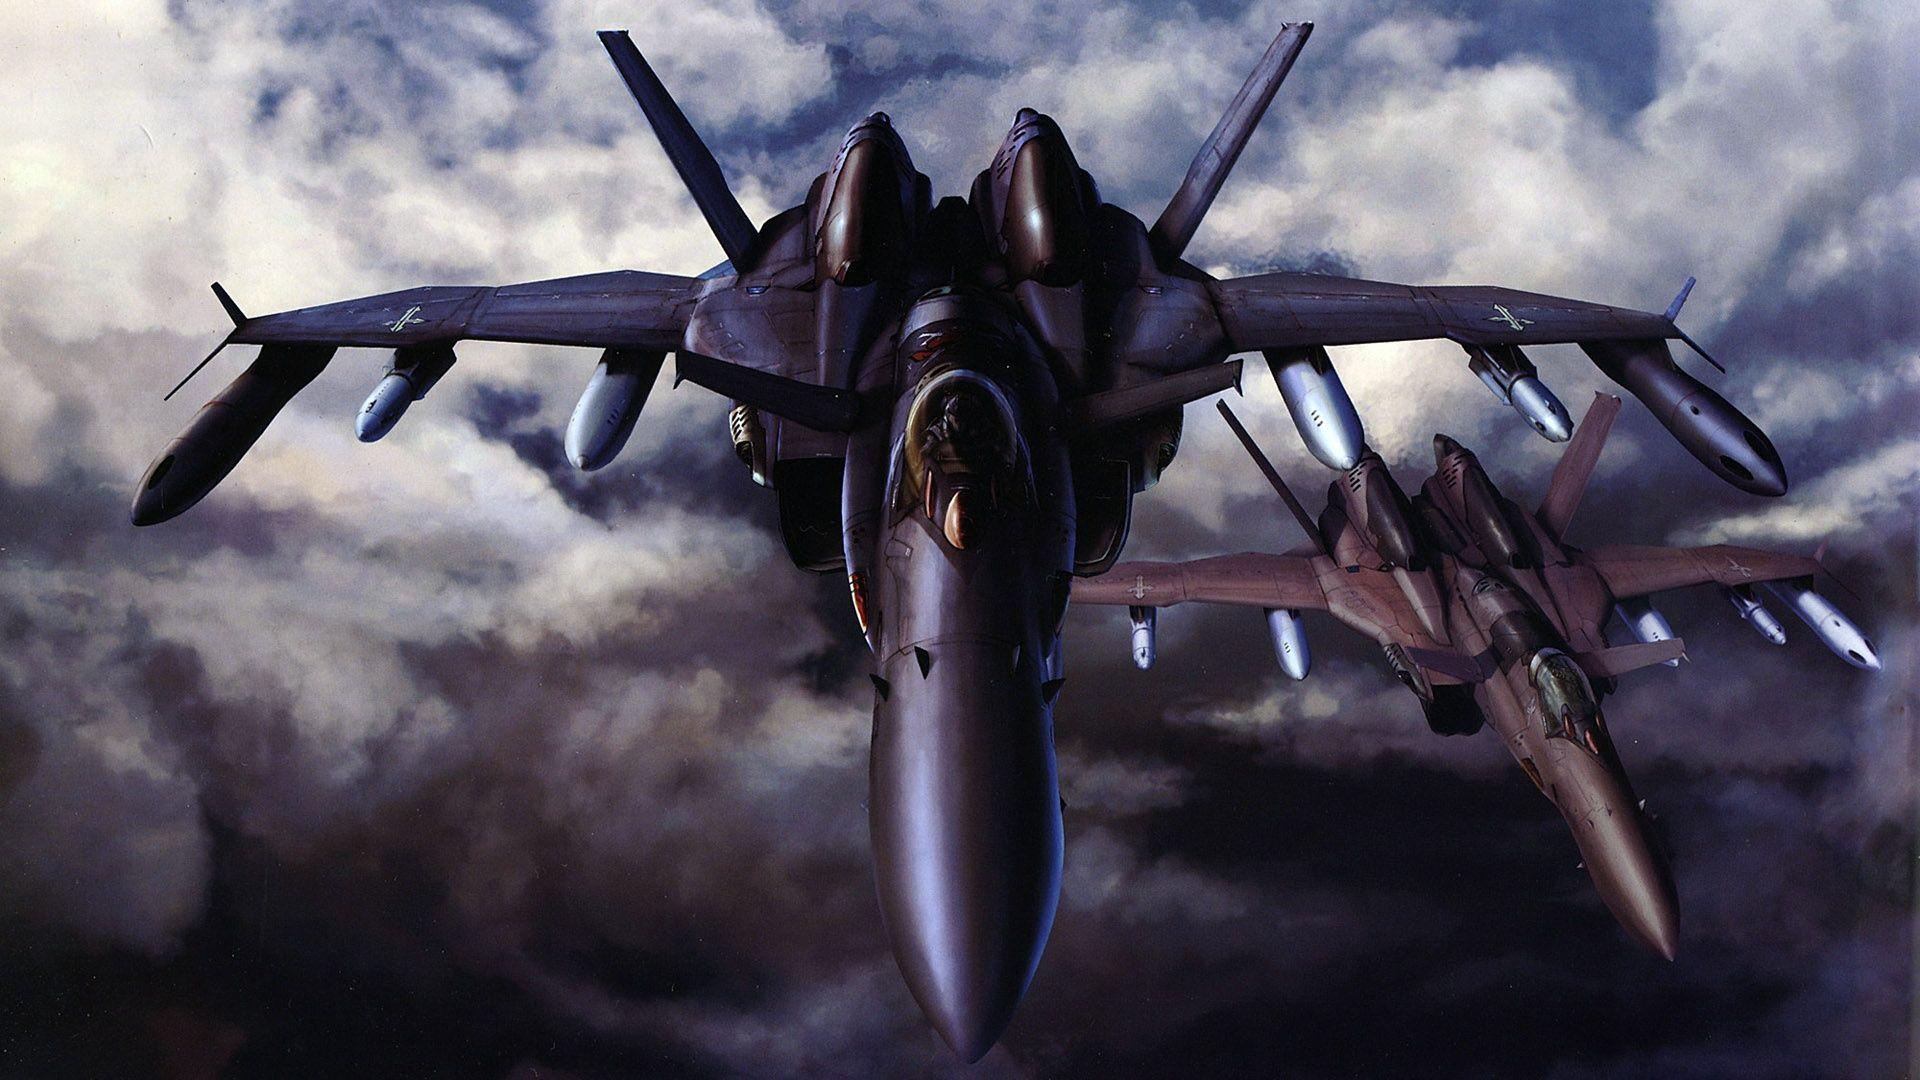 Share 62+ fighter jet iphone wallpaper - in.cdgdbentre